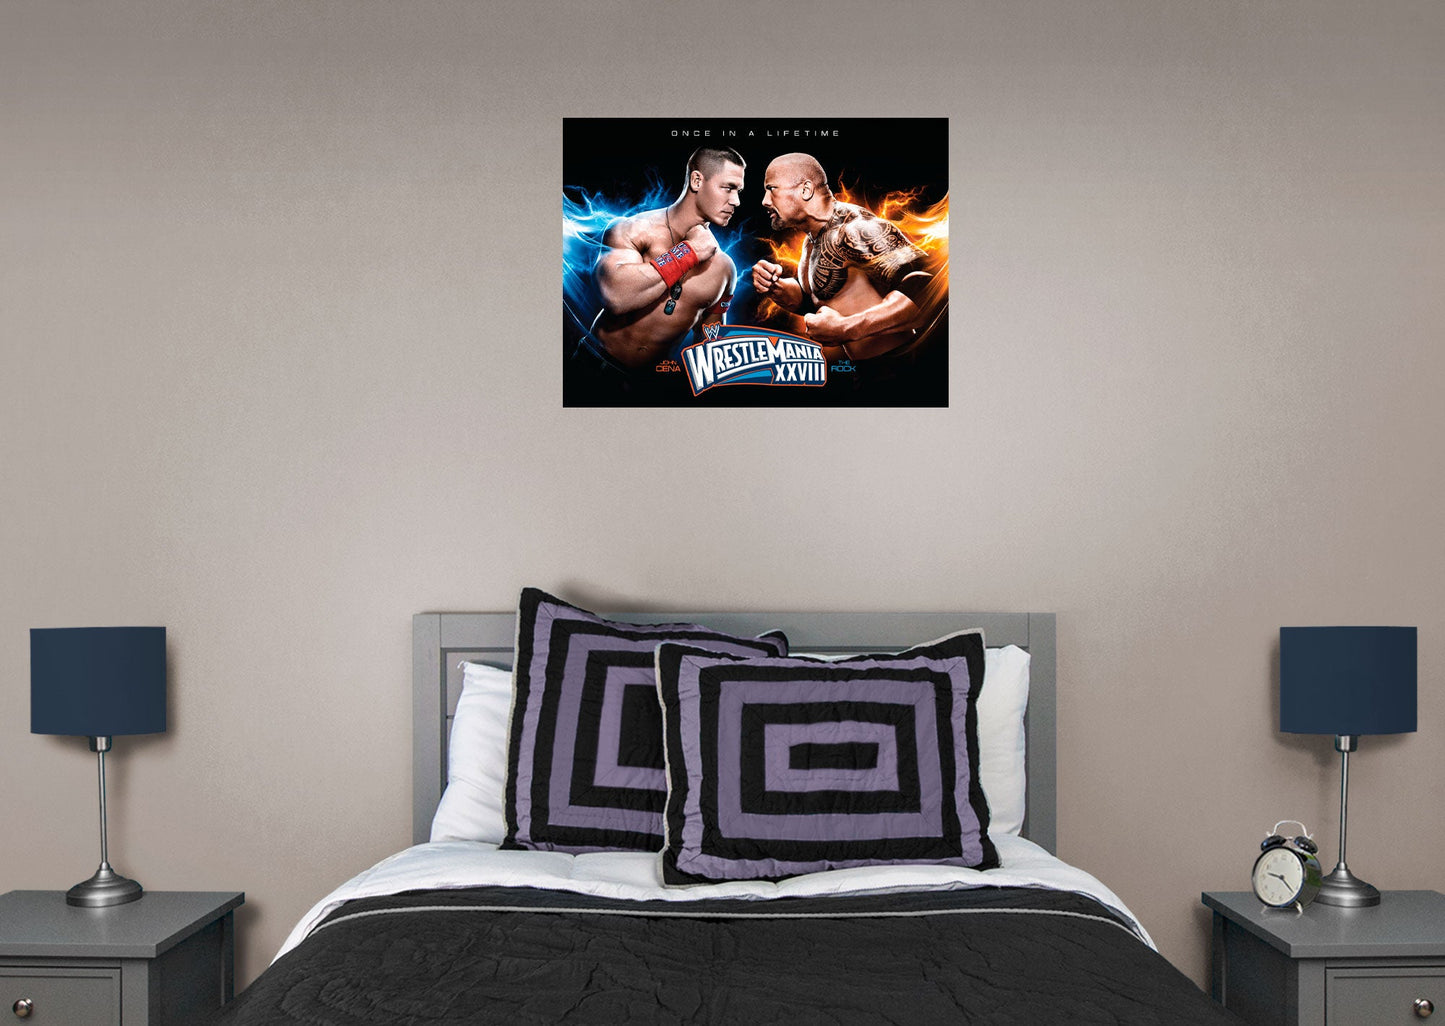 John Cena and The Rock Wrestlemania 28 Poster        - Officially Licensed WWE Removable Wall   Adhesive Decal